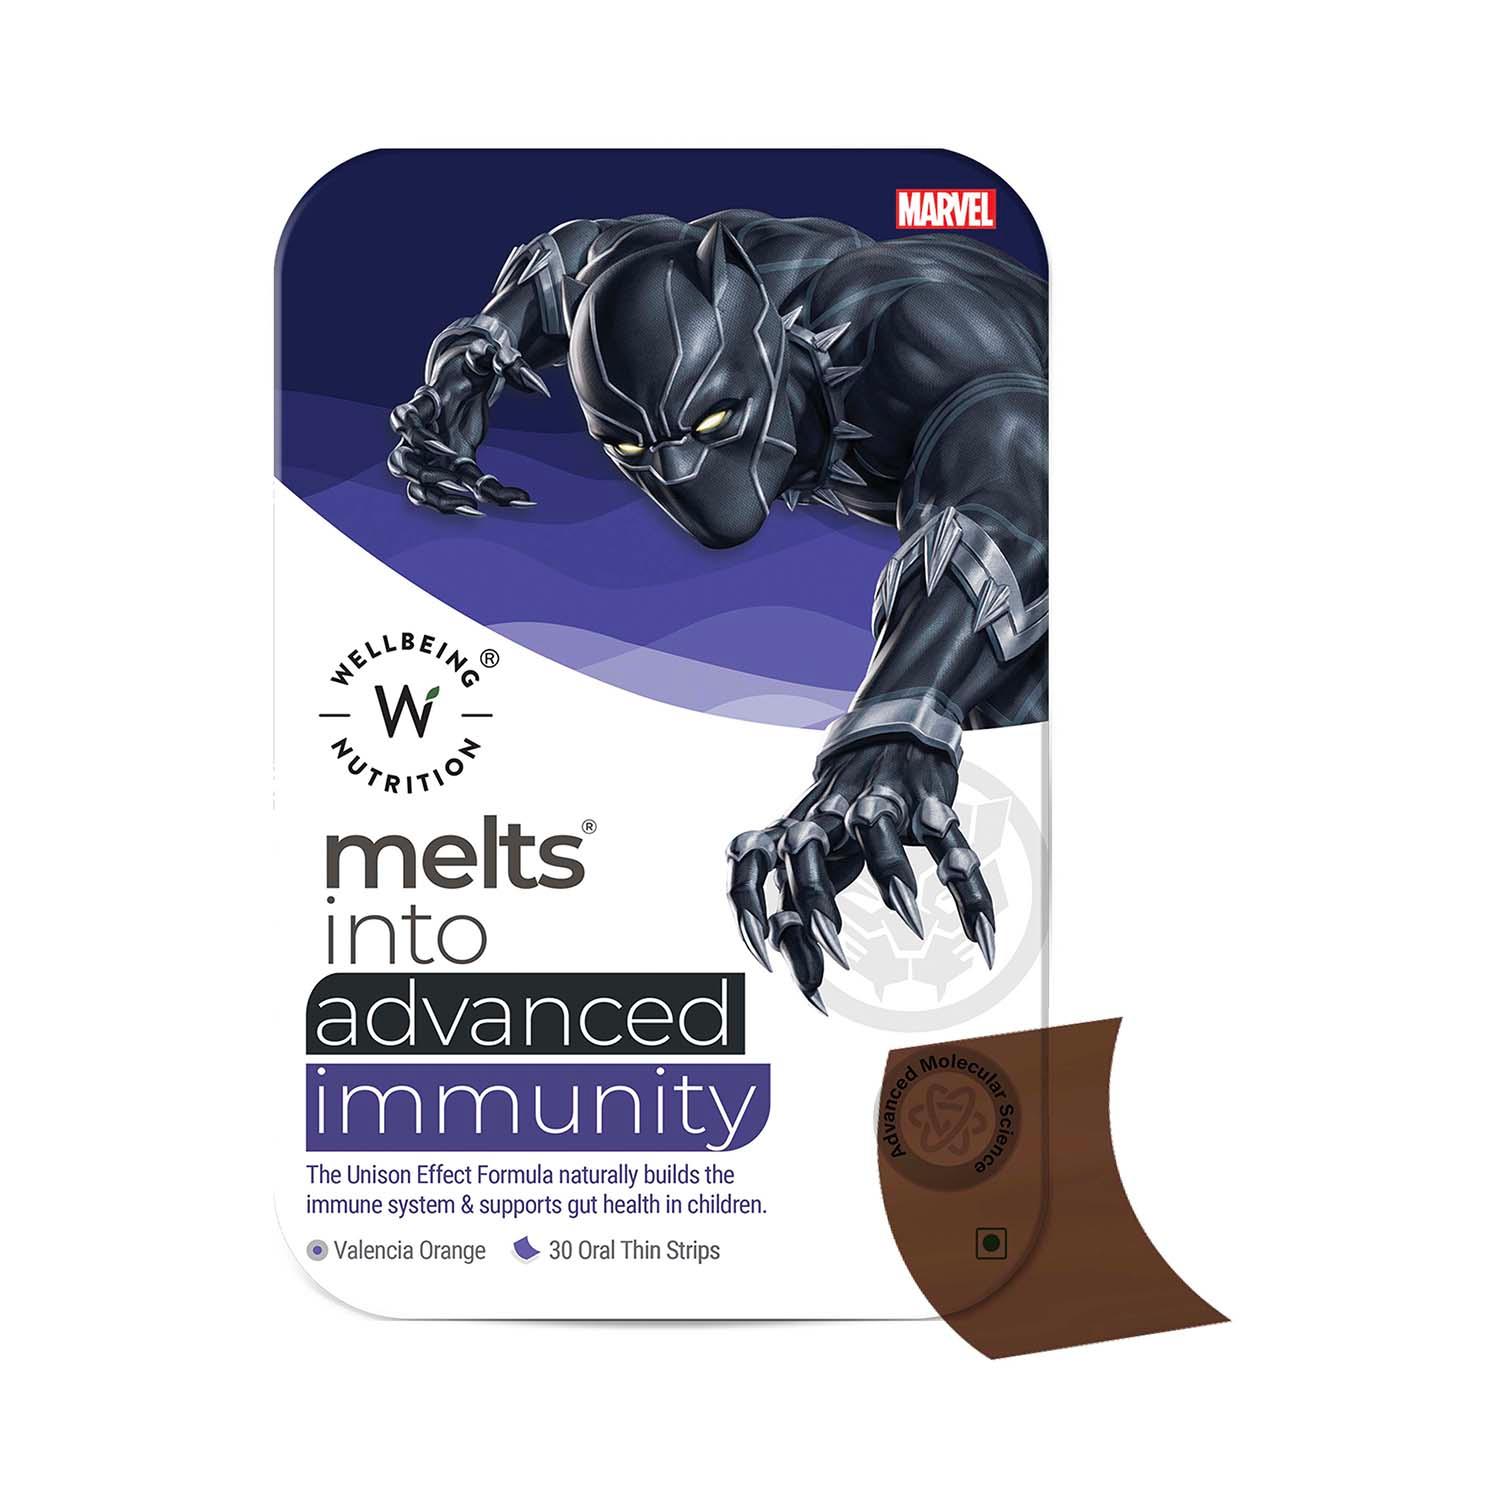 Wellbeing Nutrition | Wellbeing Nutrition Marvel Black Panther Melts Kids Advanced Immunity with Clinically Proven Vitamin C Zinc & D3 - 30 Strips